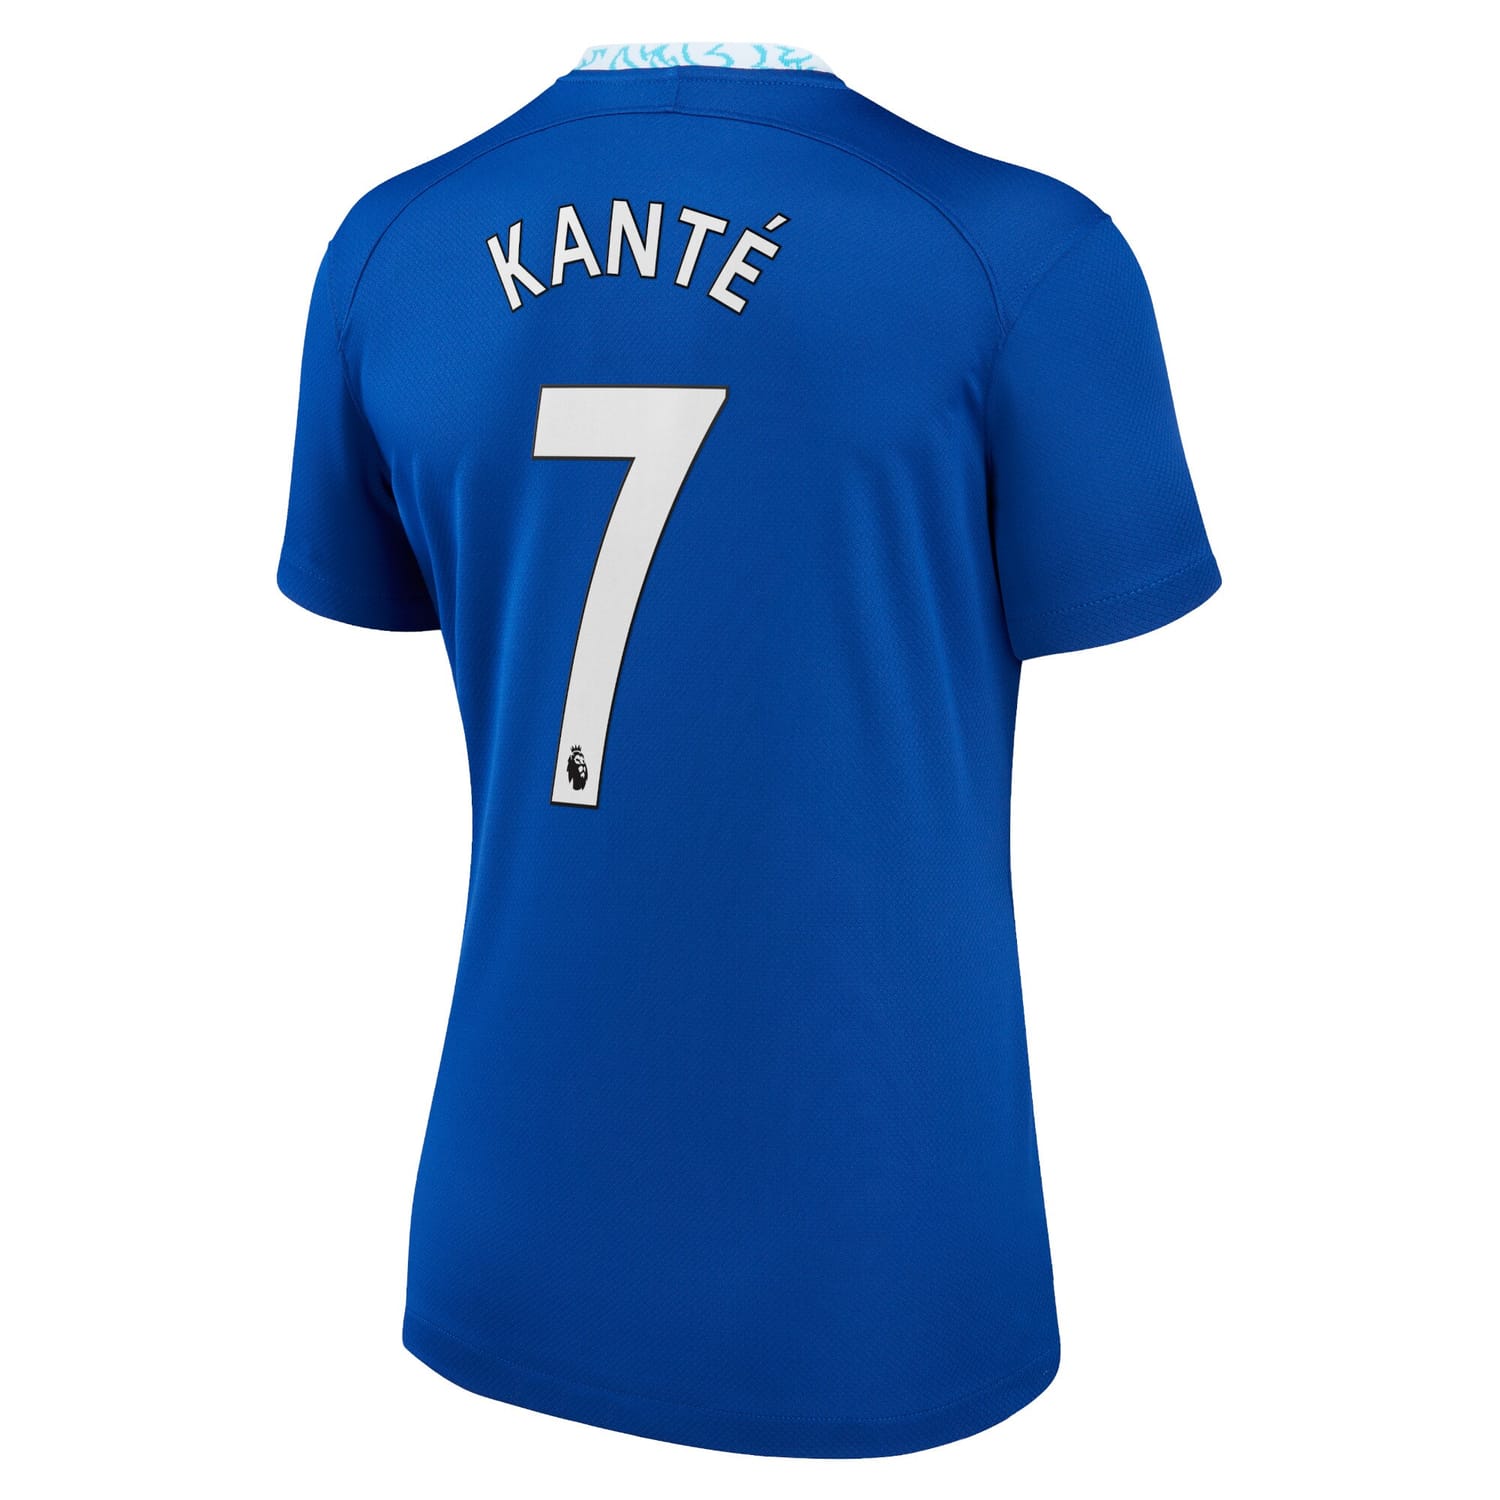 Premier League Chelsea Home Jersey Shirt 2022-23 player N'Golo Kante 7 printing for Women